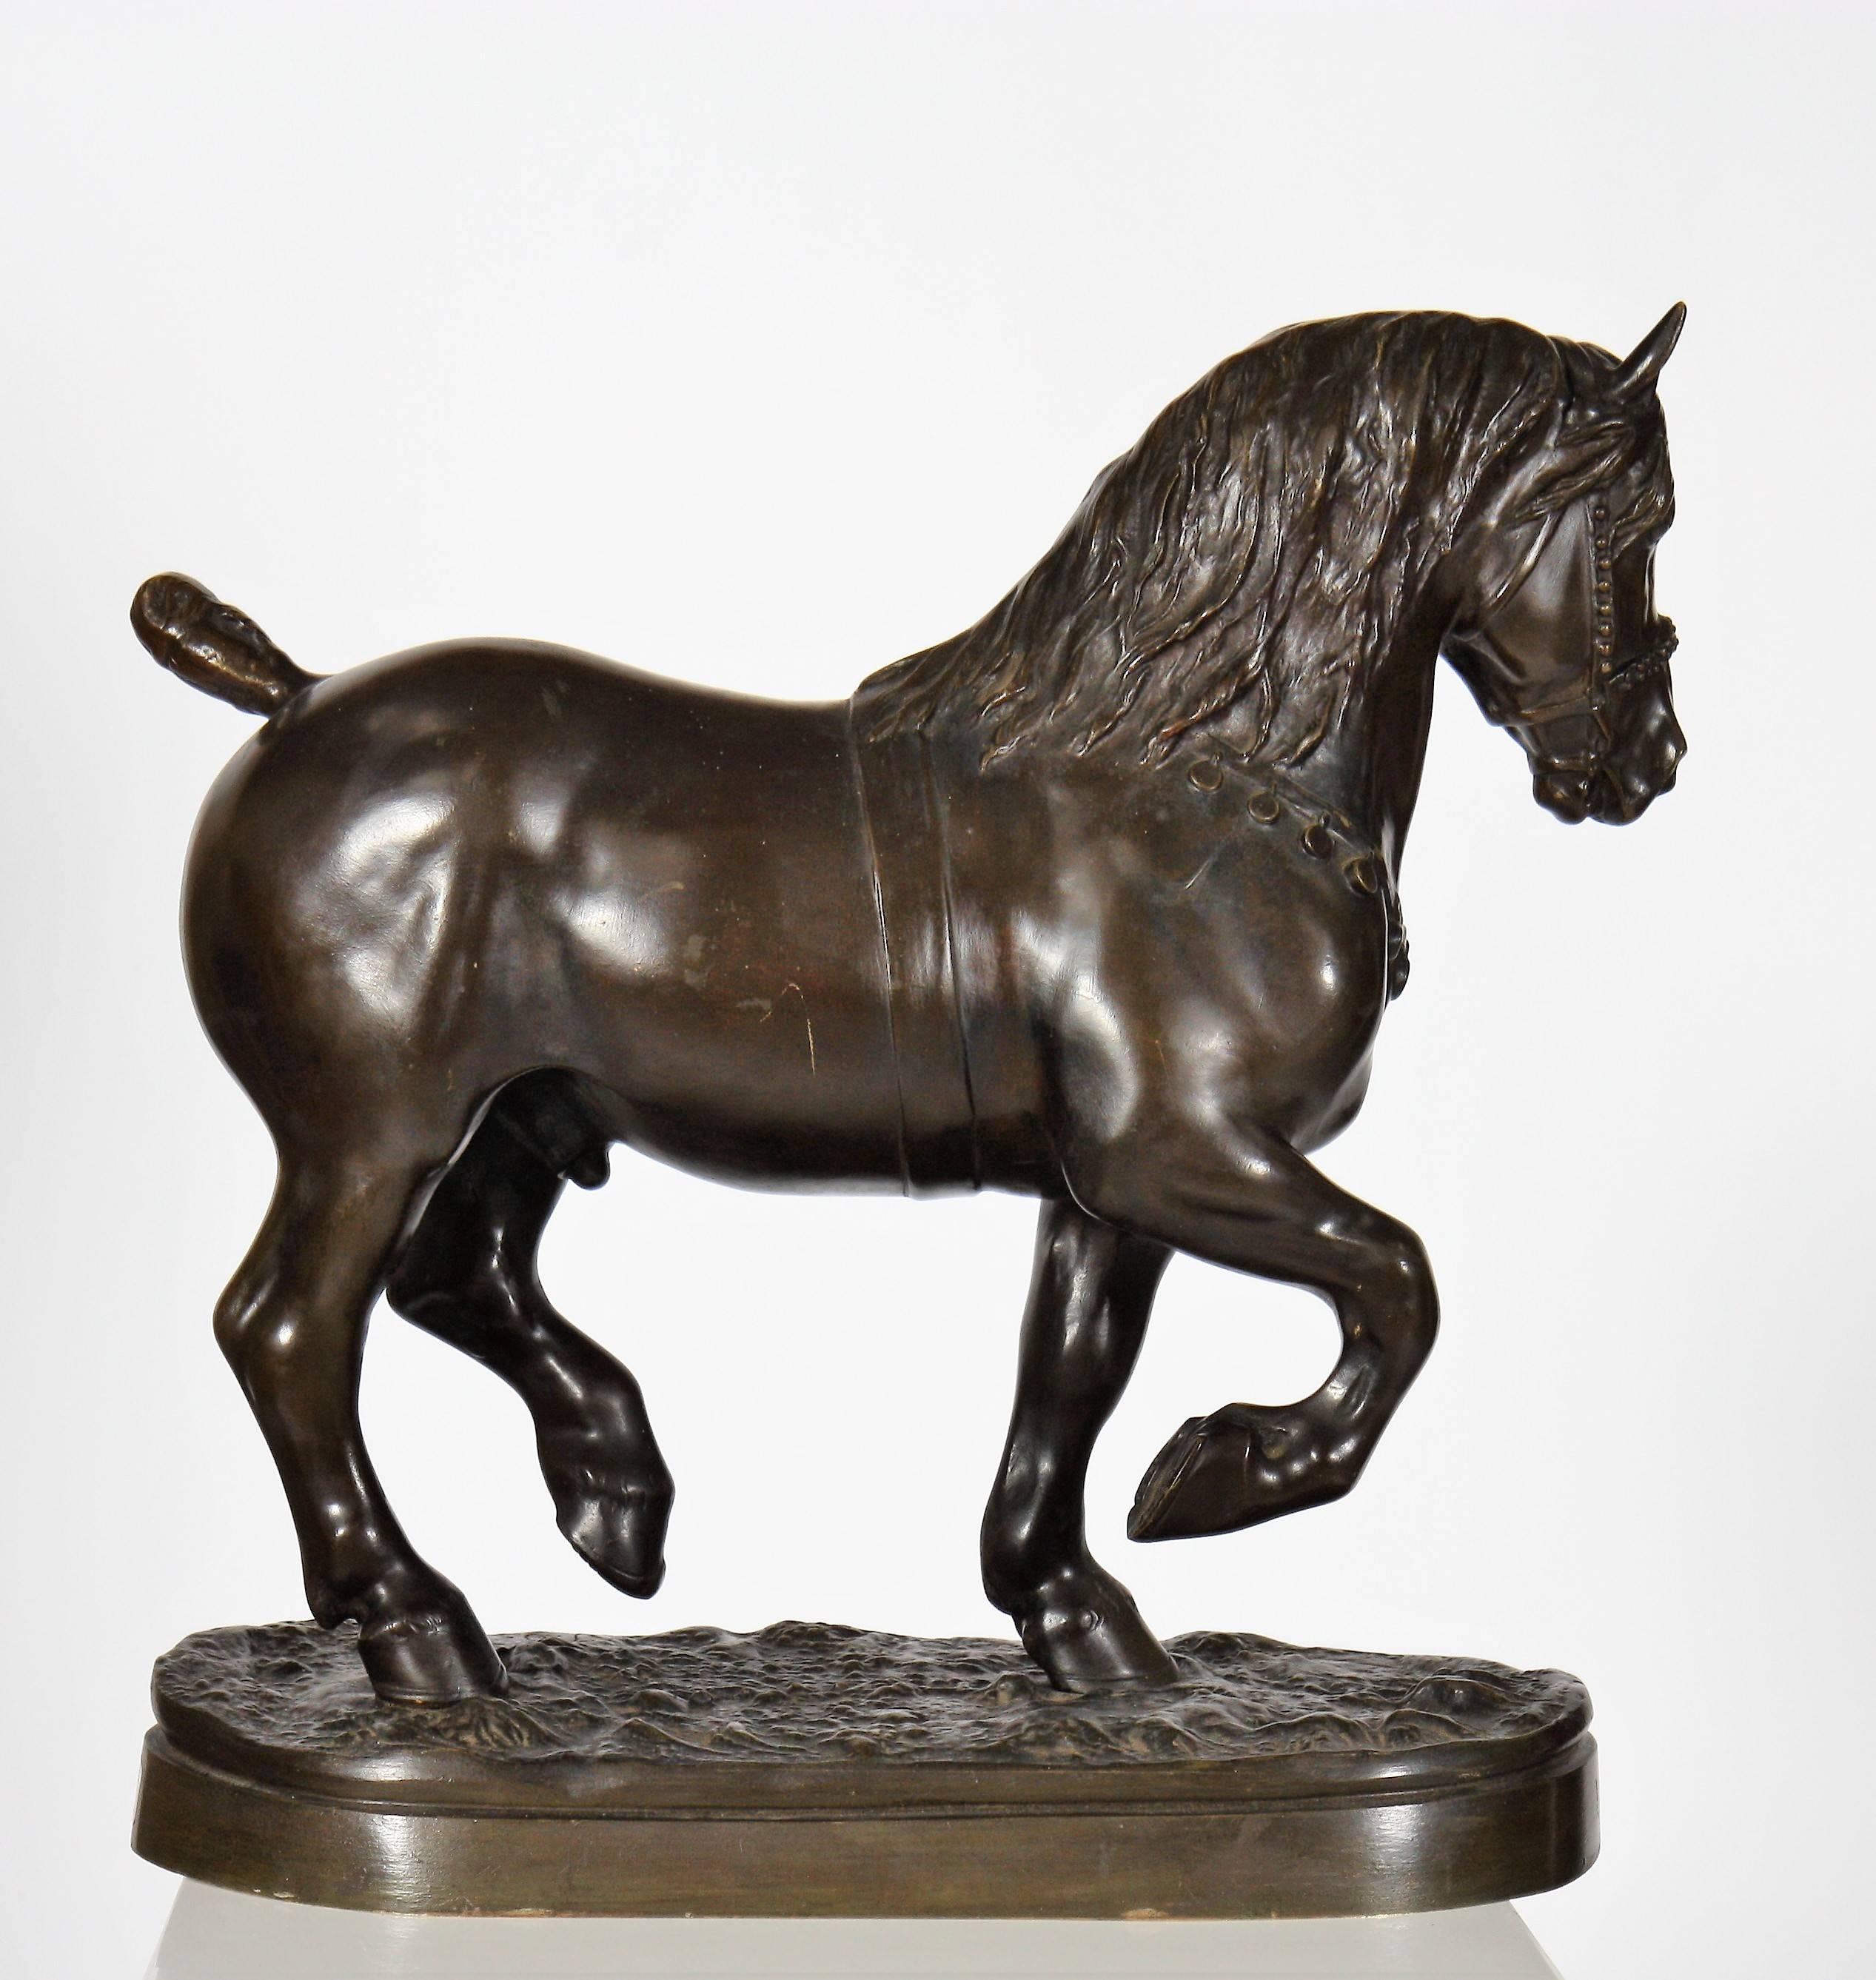 Bronze with brown patina representing a presentation horse
19th century period.
Dimension: Height 48 x width 44 cm, depth 21 cm

Jean Joire, born Jean Victor François Joseph Joire, September 5, 1862 in Lille, and died September 8, 1950 in the